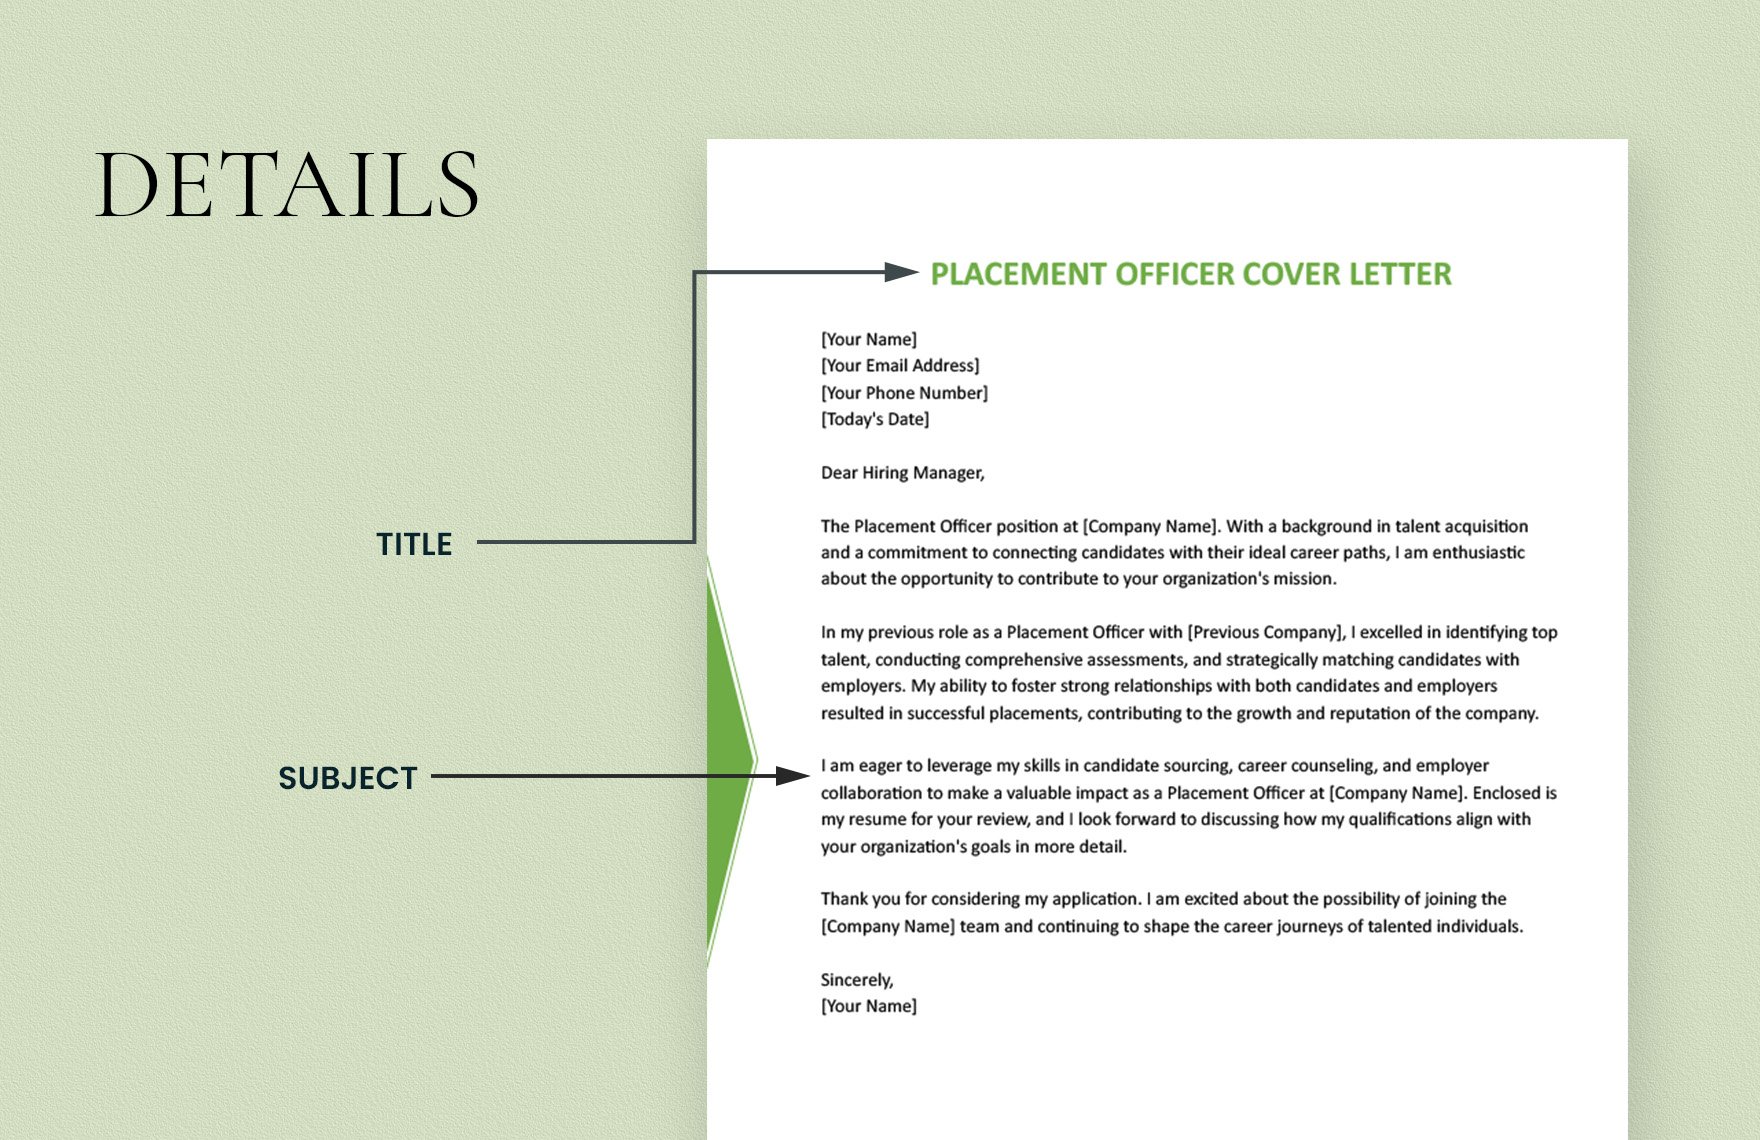 Placement Officer Cover Letter